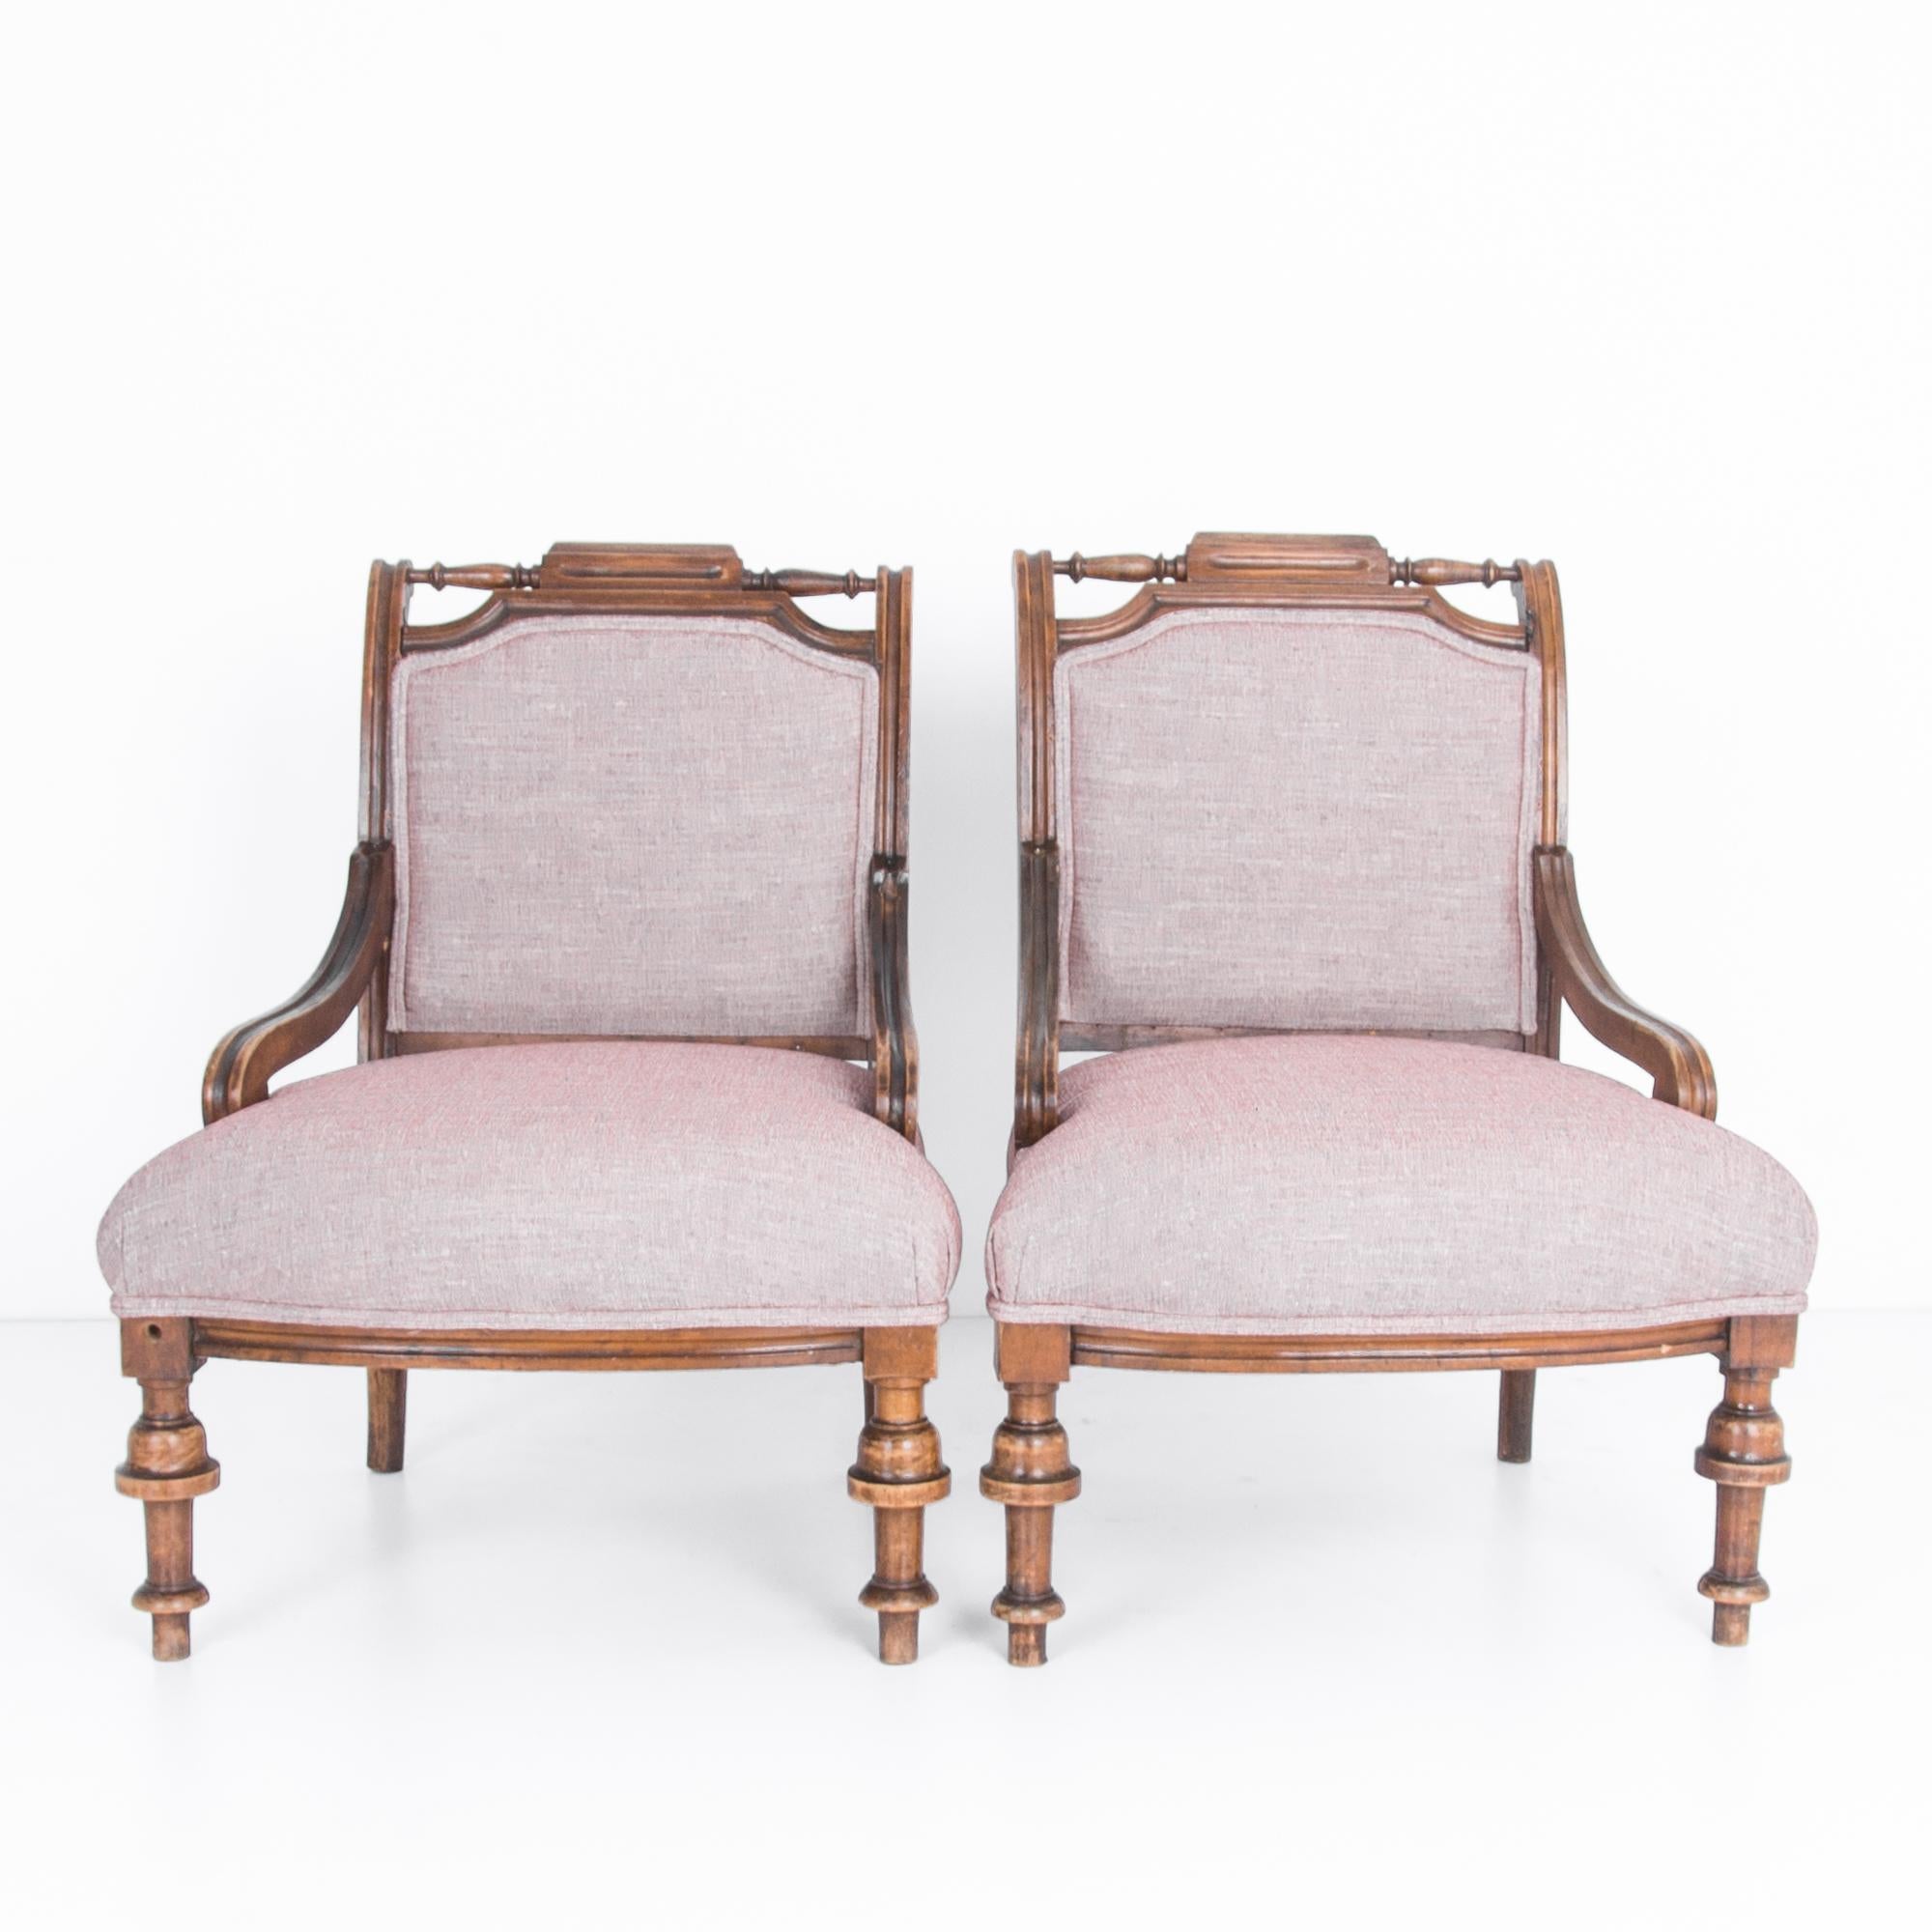 From France, circa 1880. Eye-catching decorative wood turned columns give a great detail in these Provincial armchairs. The chairs are composed with classical curves, following the rigour of geometric proportion and the orders of French design,